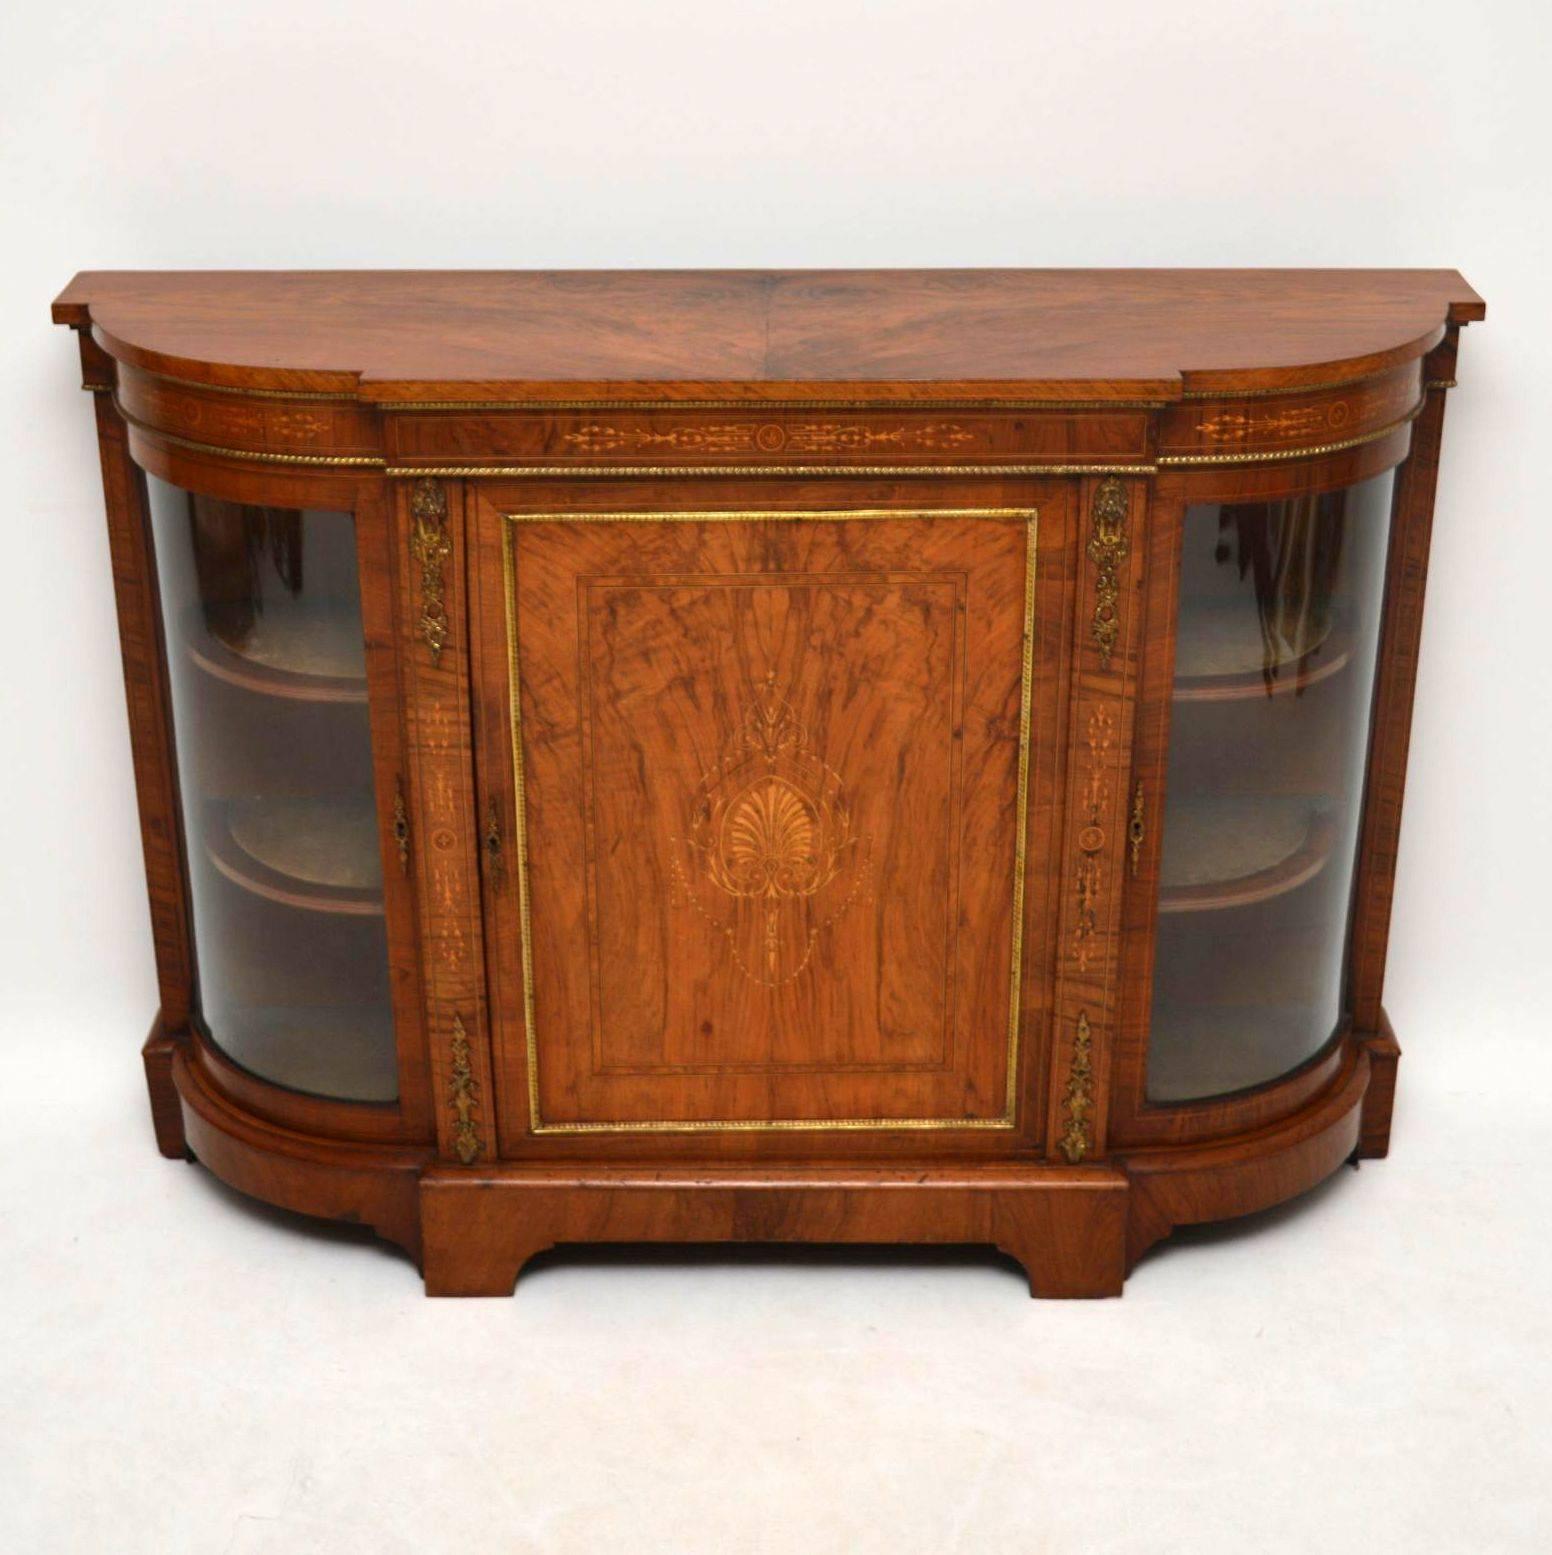 Antique Victorian figured walnut credenza in good original condition, with fine inlays and gilt bronze mounts. There are a lot of fine inlays all along the top, down the front sides and loads more on the central panelled door. There are two gilt